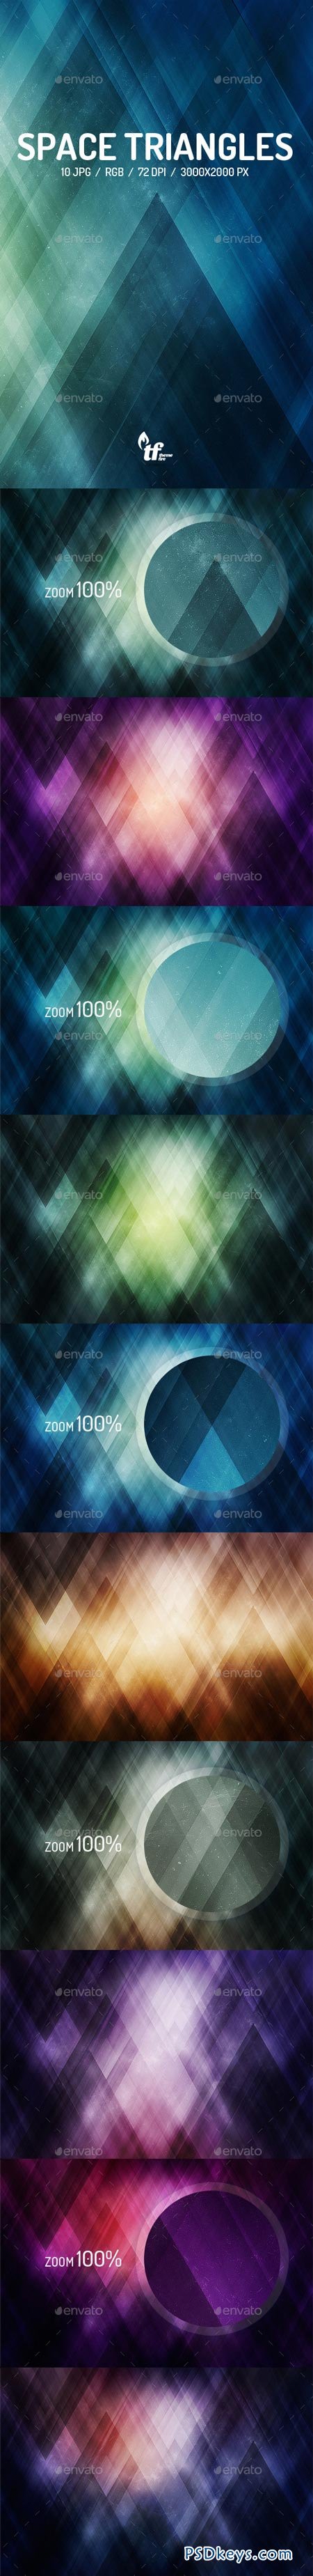 Space Triangles Backgrounds 9088678